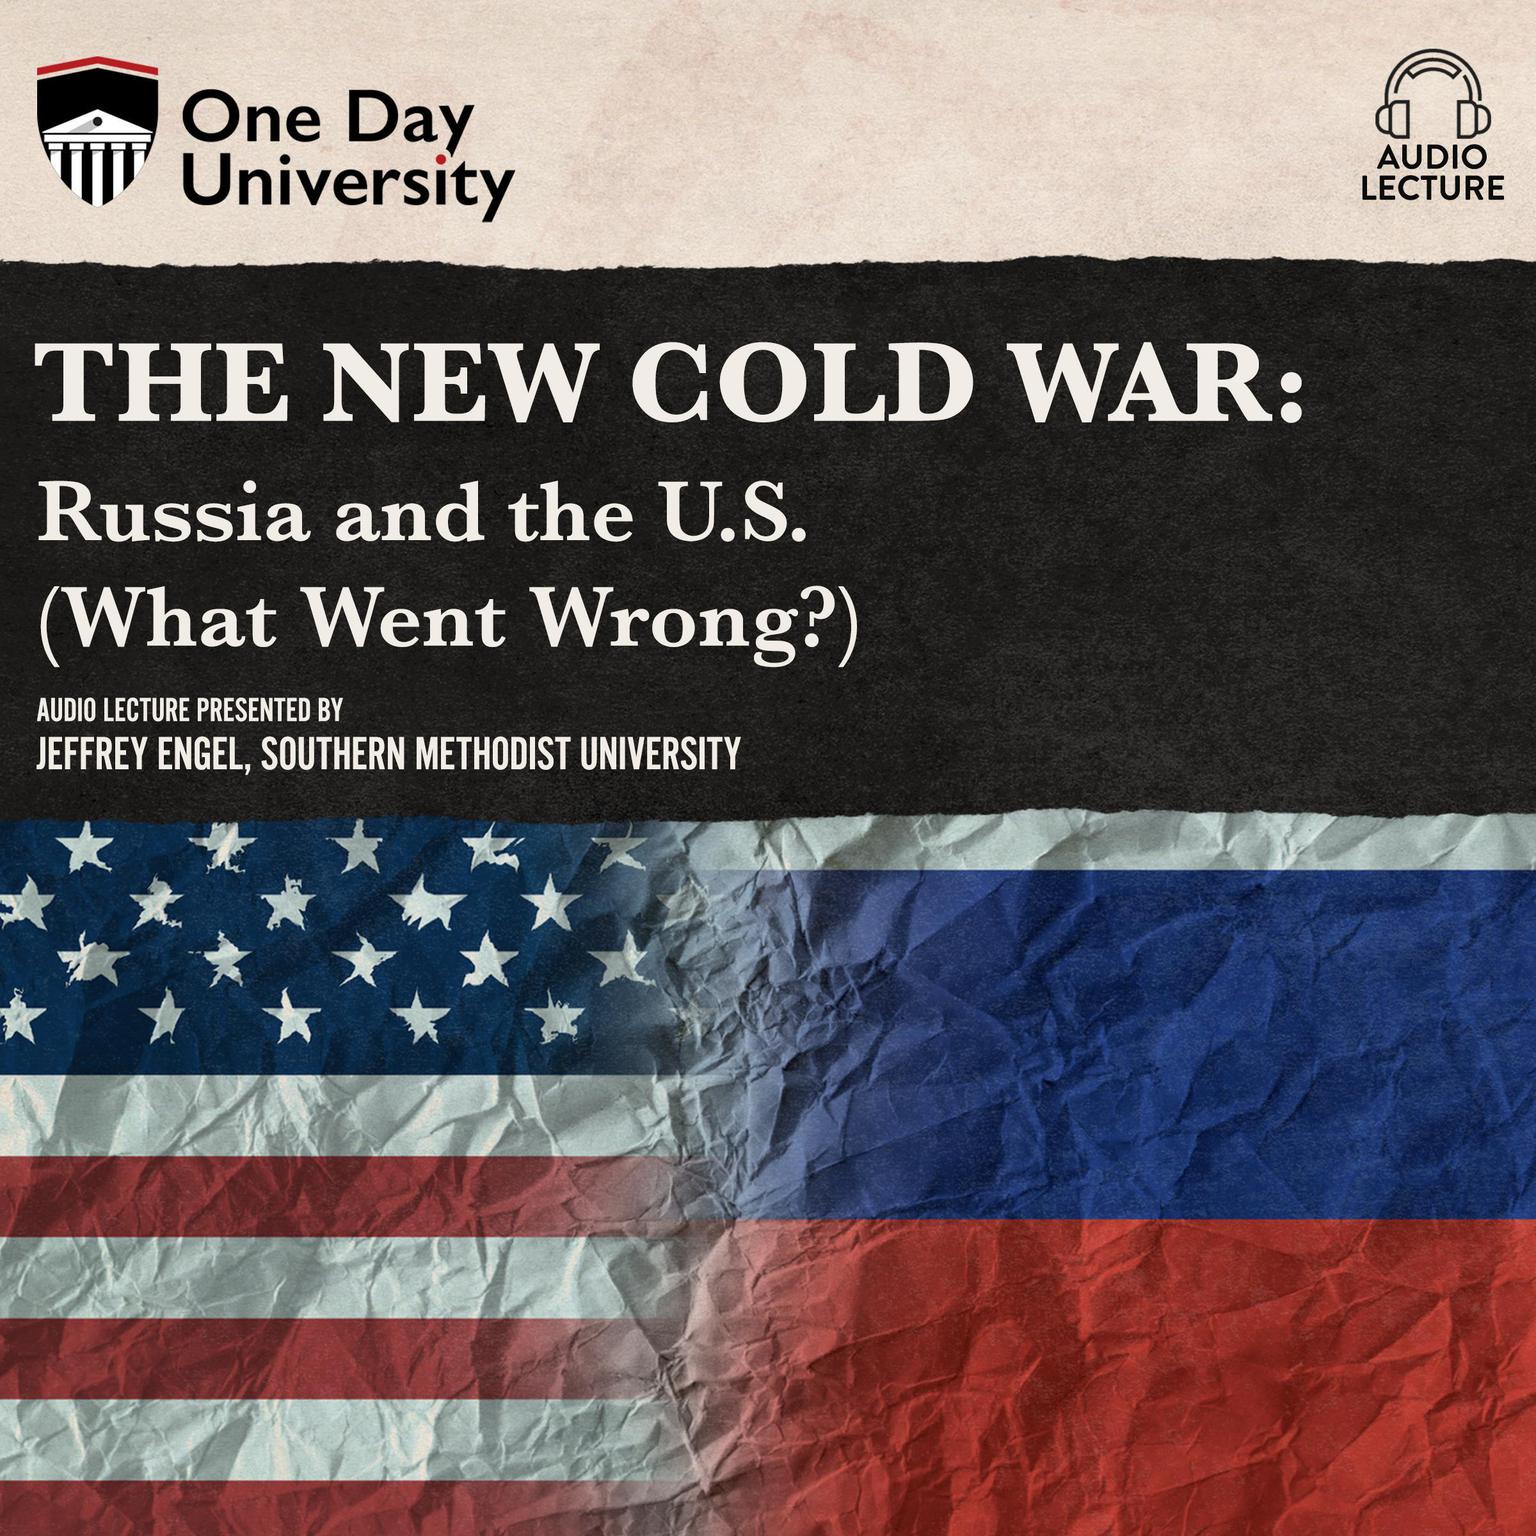 The New Cold War: Russia and the U.S. (What Went Wrong?) Audiobook, by Jeffrey Engel